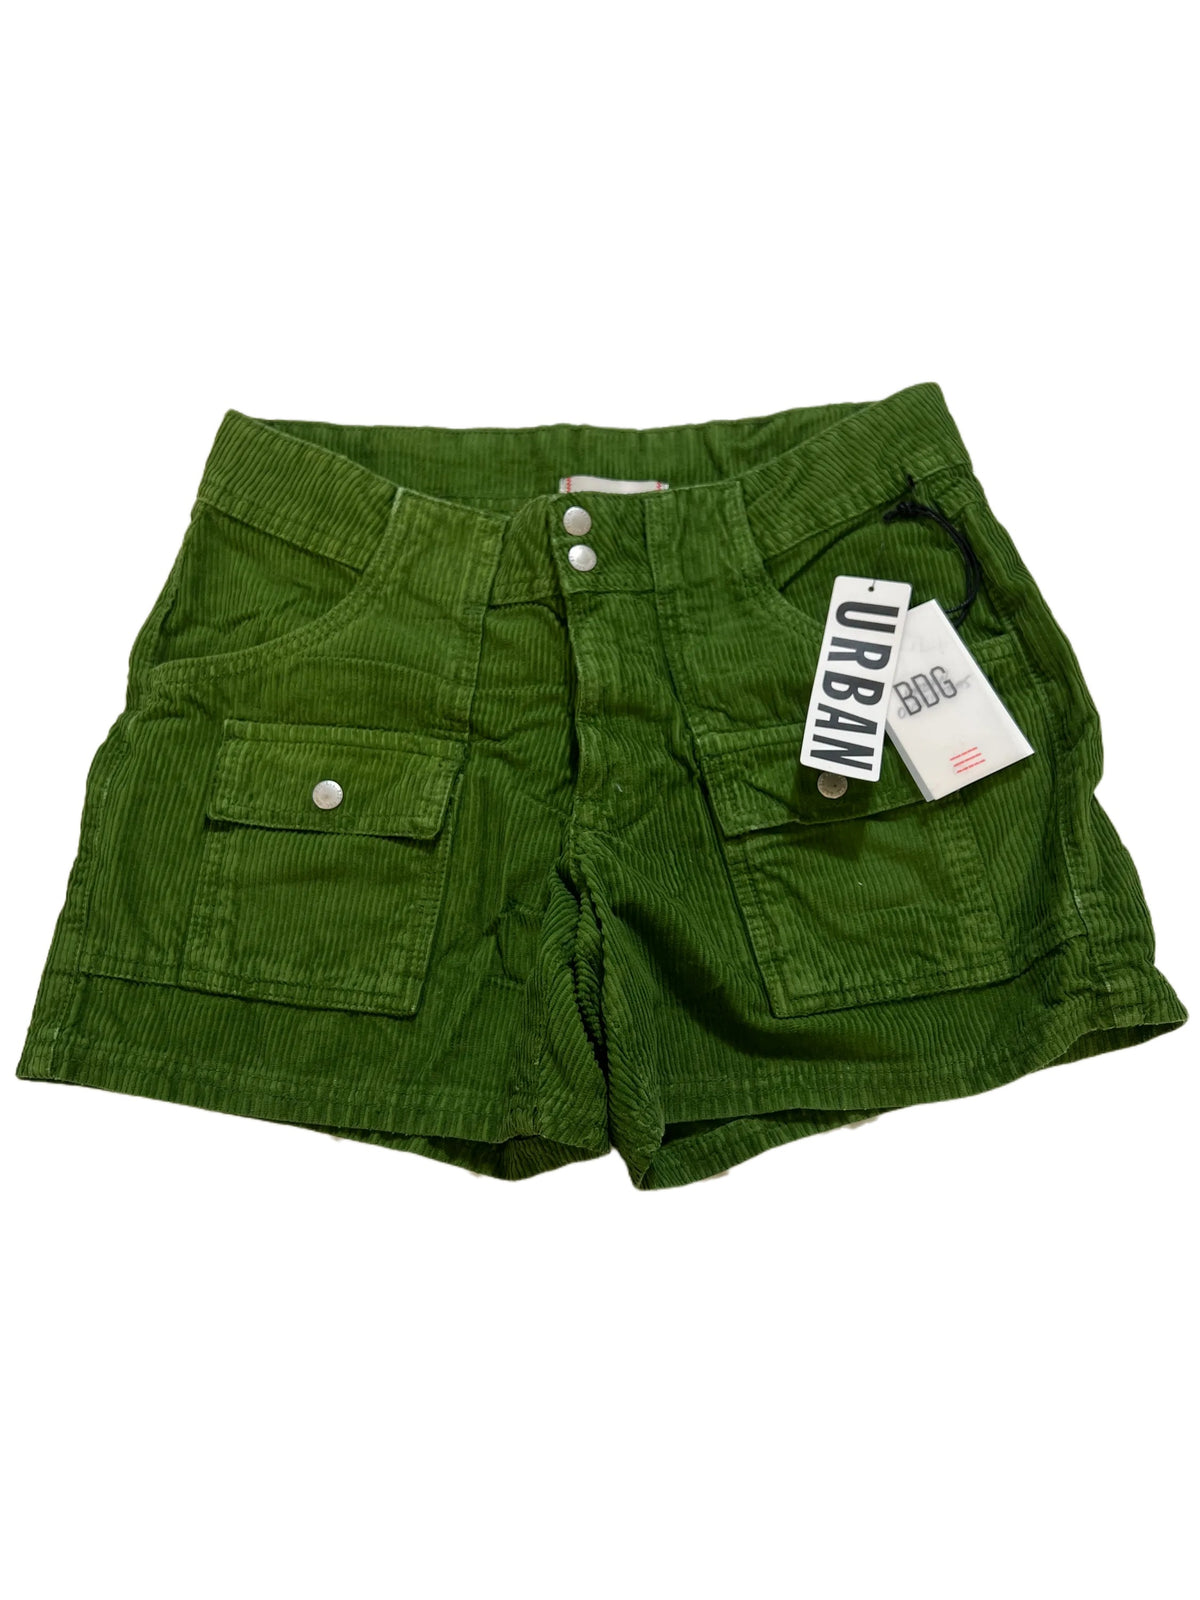 BDG- Green Corduroy Shorts New With Tags!